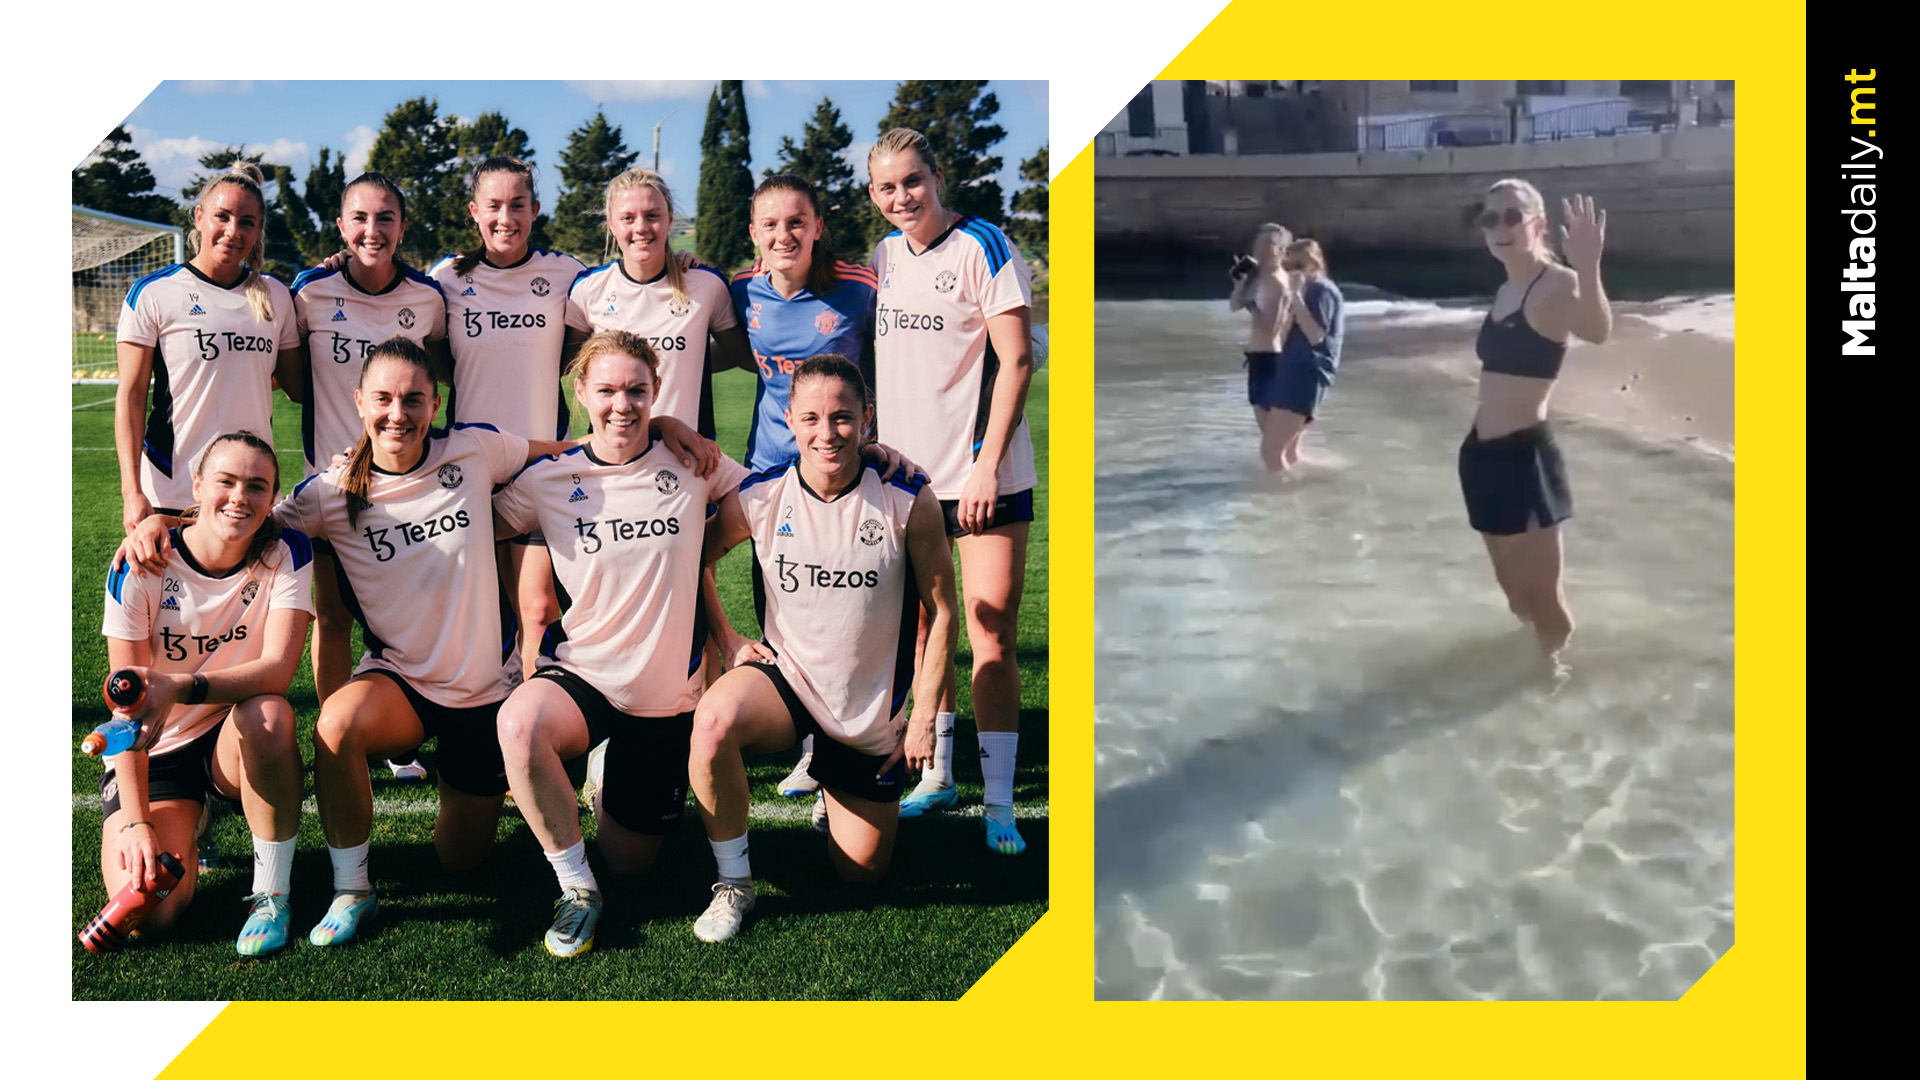 Manchester United women make the most of Malta's sunny weather and go for Sliema swim